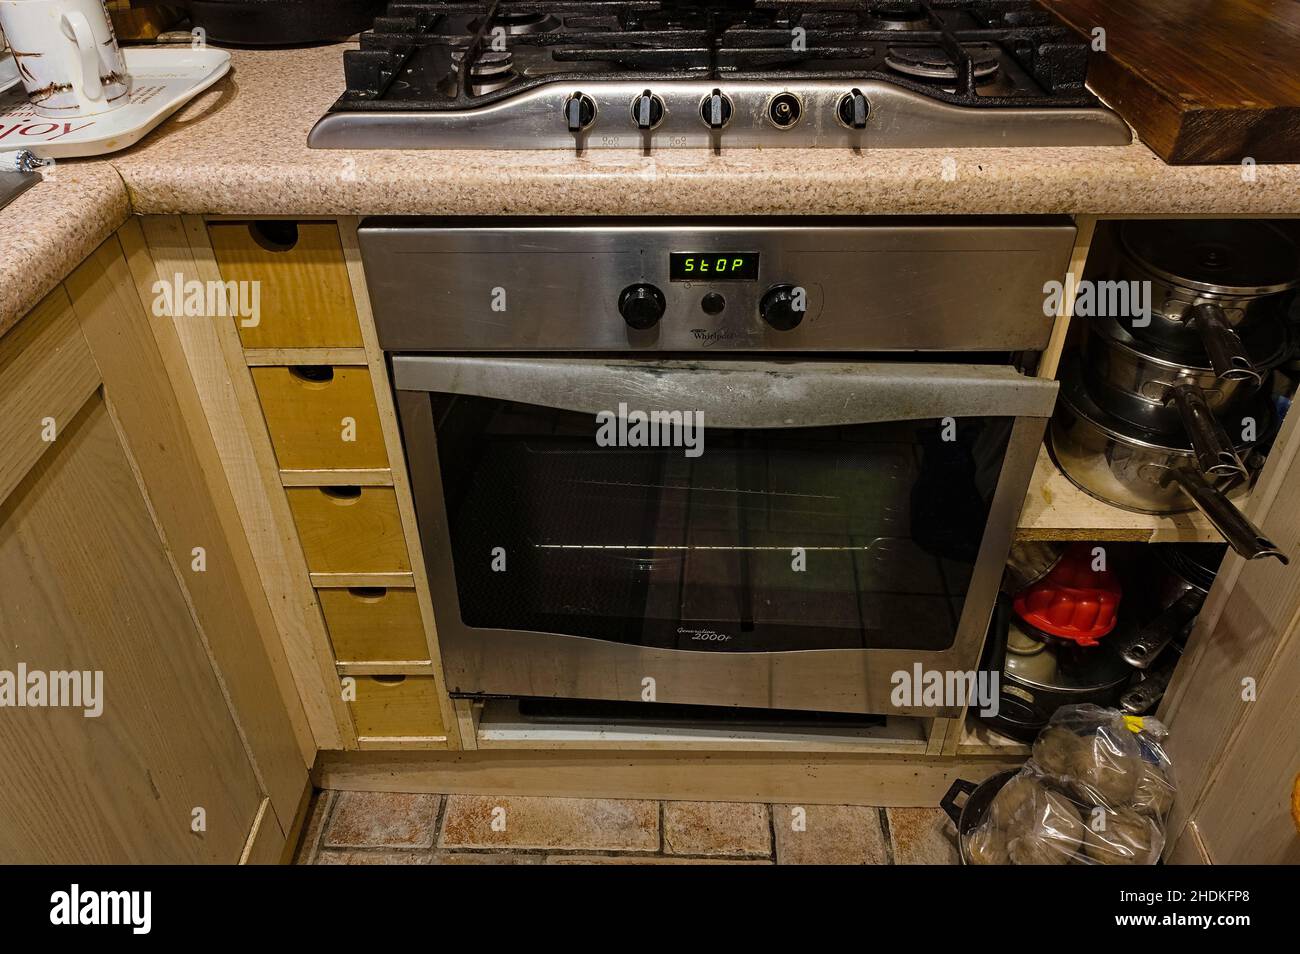 Built in Whirlpool oven with broken door and missing control knob in a home kitchen Stock Photo